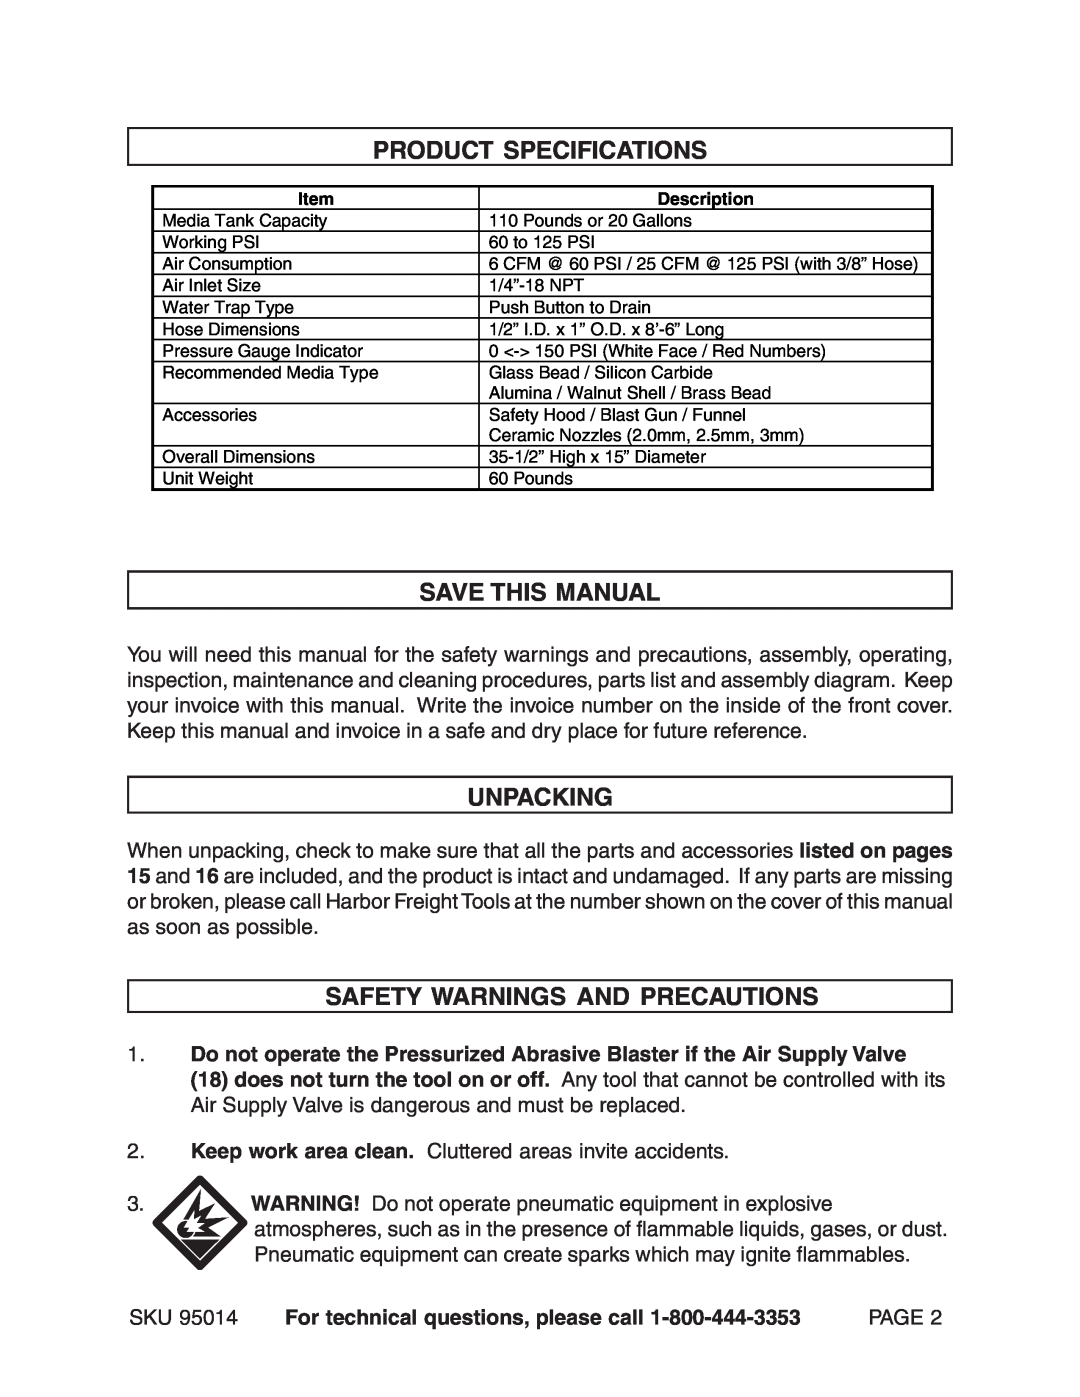 Harbor Freight Tools 95014 Product Specifications, Save This Manual, Unpacking, Safety Warnings And Precautions 